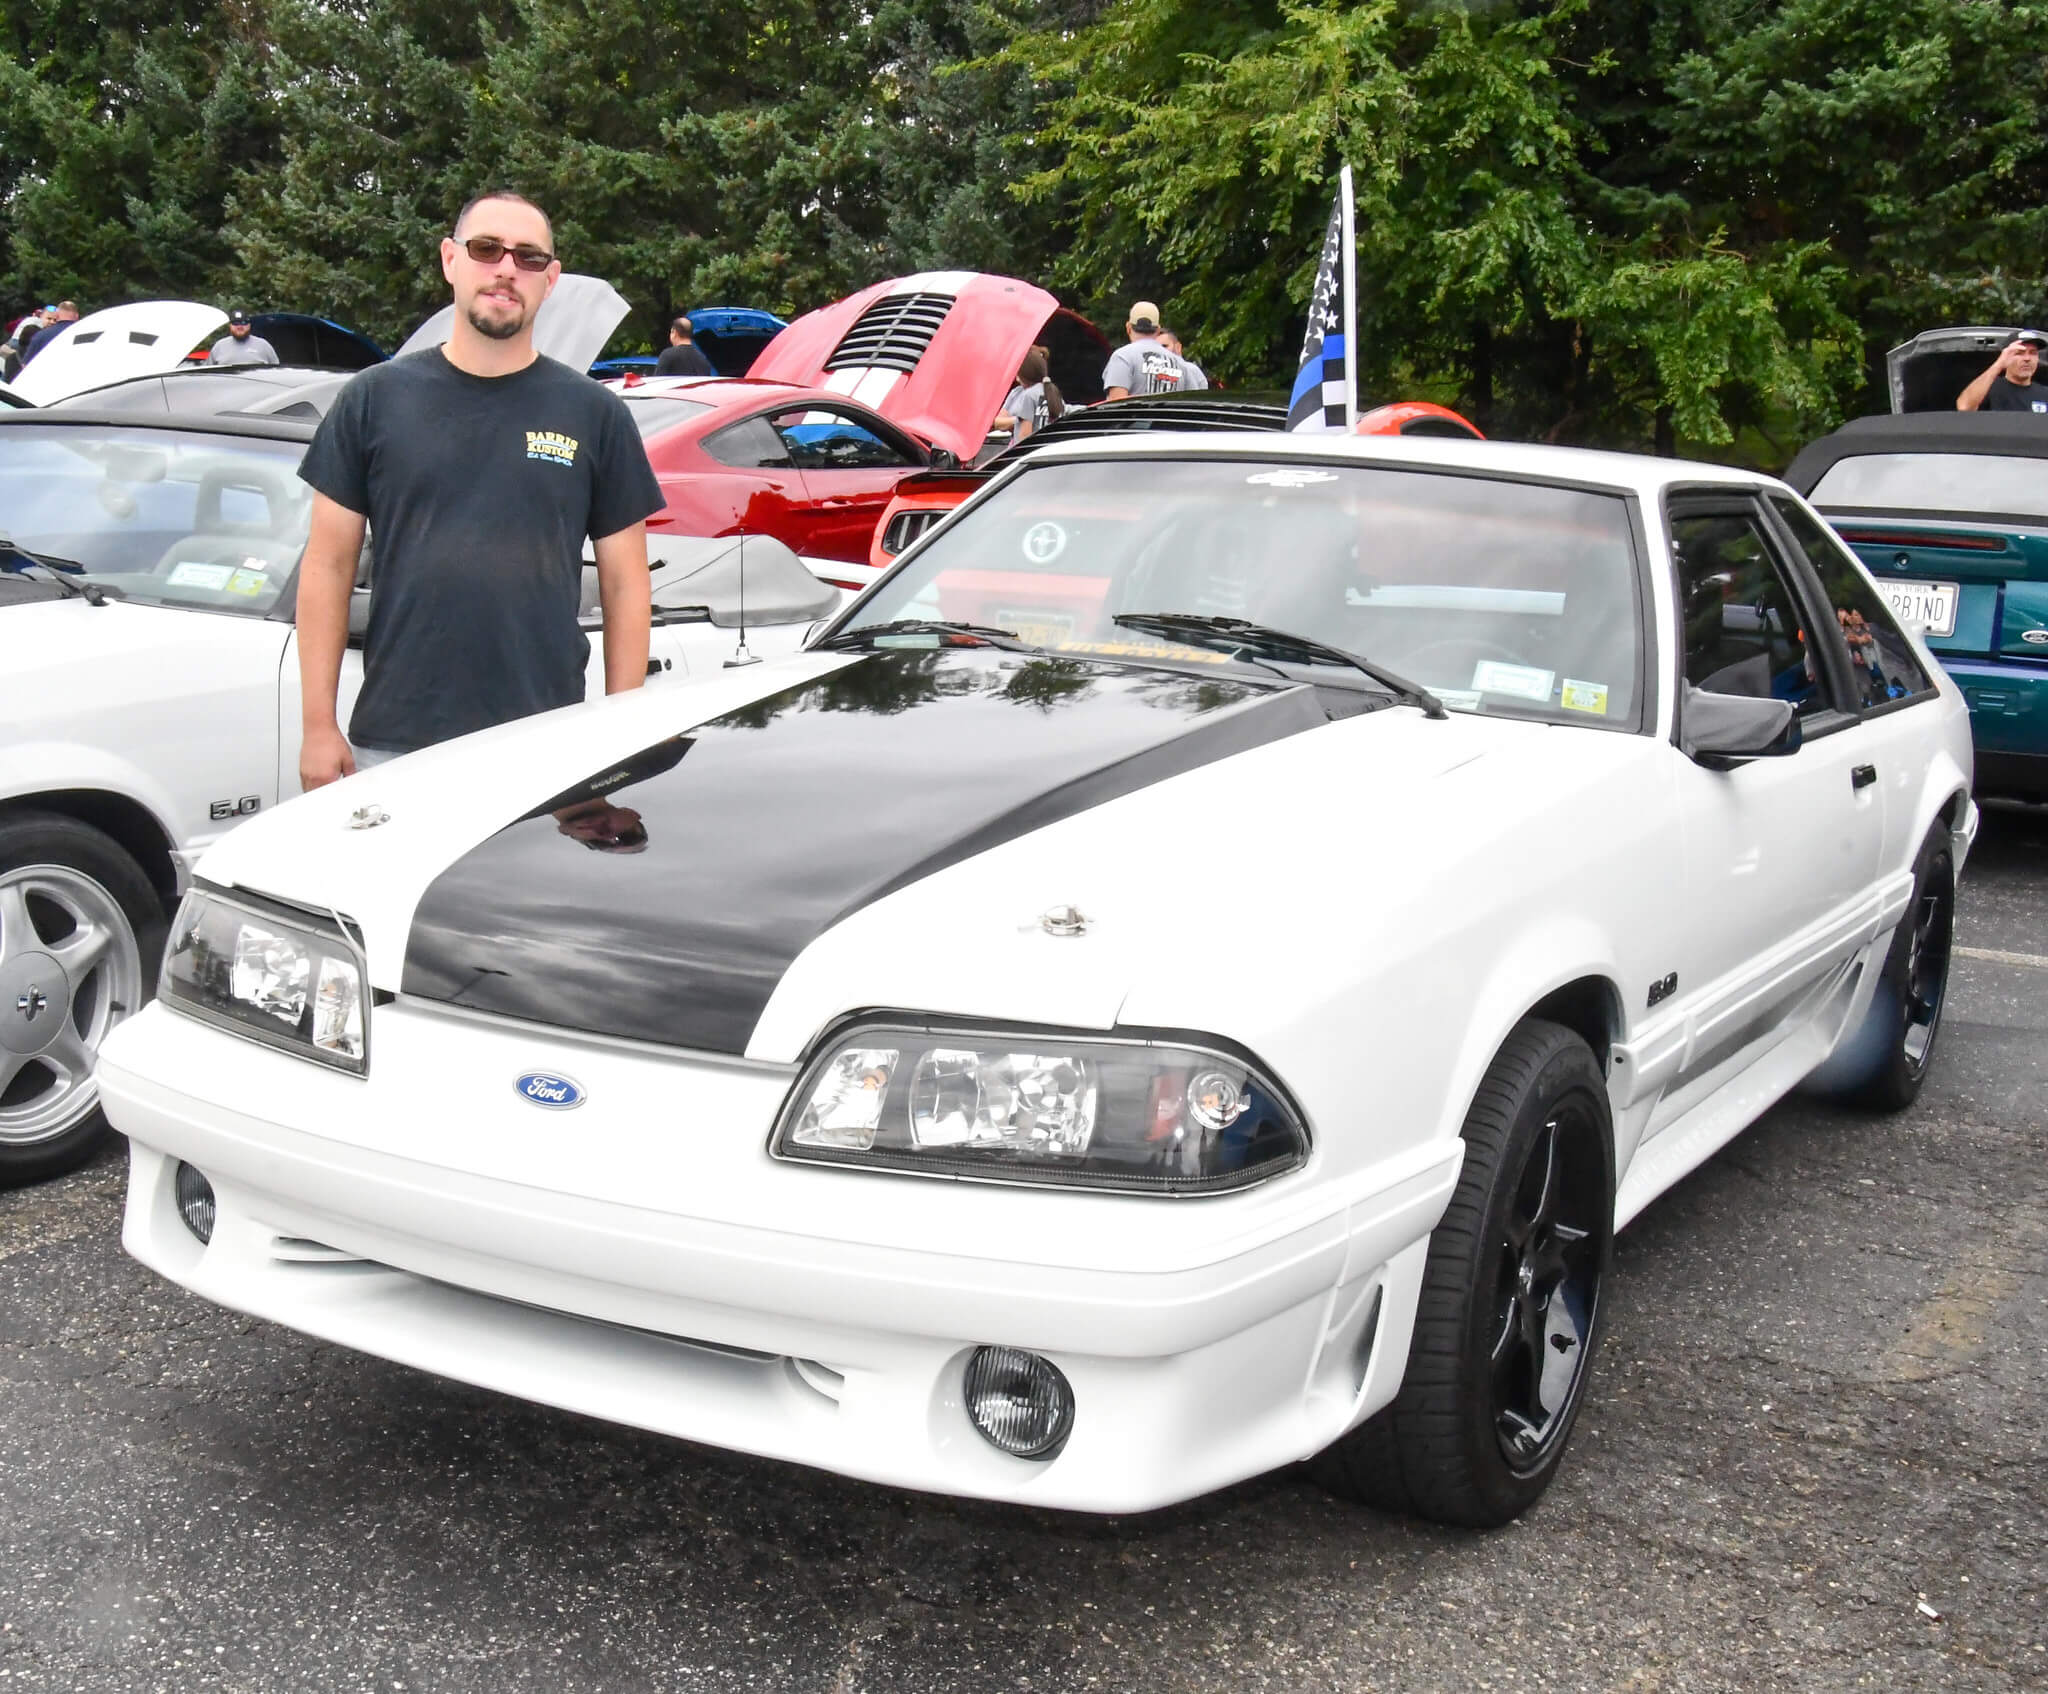 Image 10 Dominick Artale with his 89 White Mustang GT